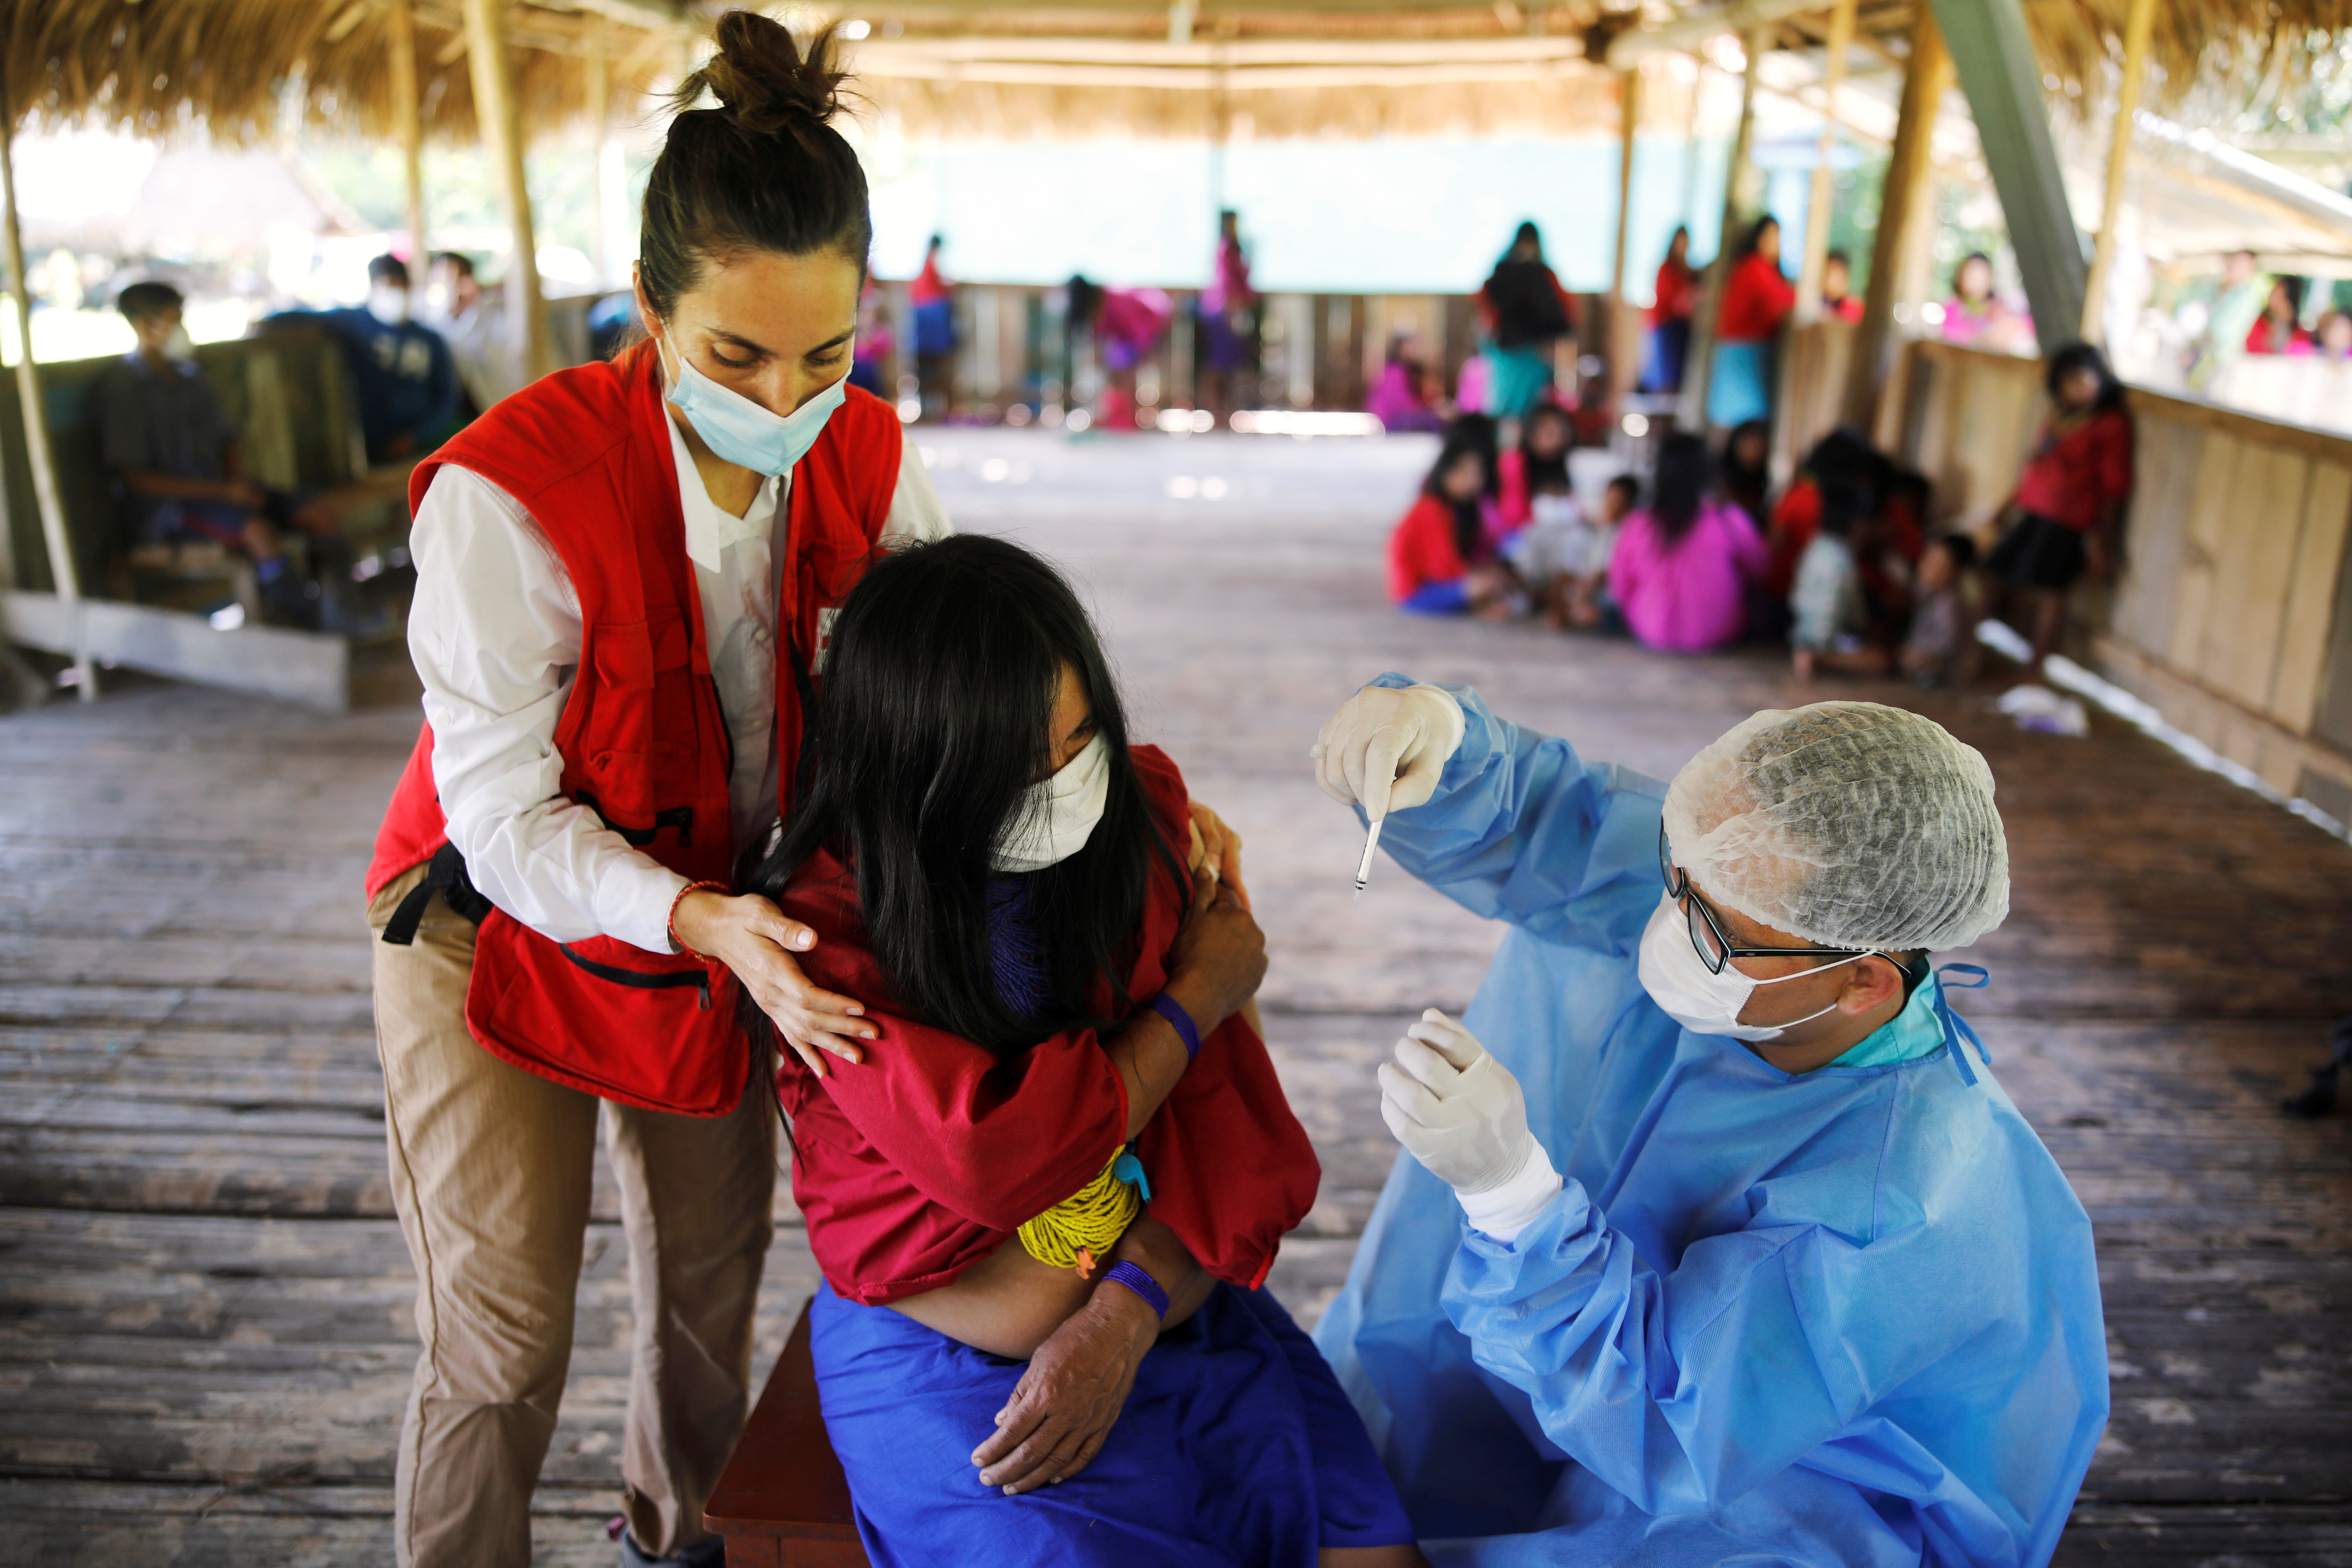 A woman is administered a vaccine for the coronavirus disease (COVID-19) during an outreach by healthcare workers who traveled by river into the Amazon rainforest to educate people from the indigenous Urarina population about the disease and offer medical care, in Mangual, Peru October 11, 2021. Picture taken October 11, 2021. REUTERS/Sebastian Castaneda